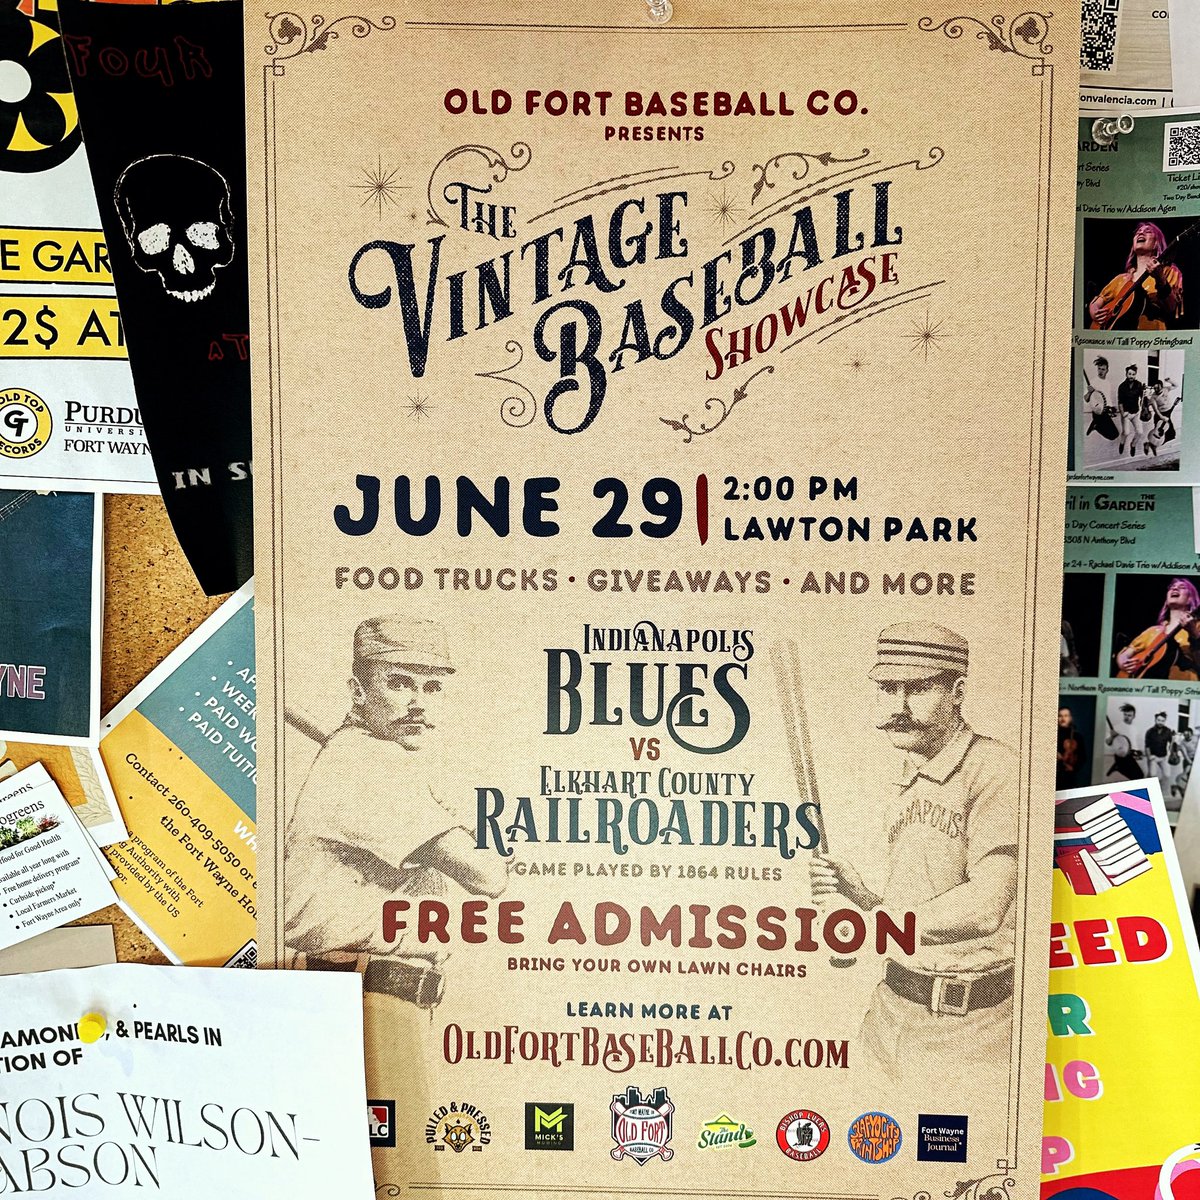 Vintage Showcase Posters are starting to hit the town! 

Hit us up if you want one to hang in your business or office and we will make it happen ⚾️

#fortwayne #fortwayneindiana